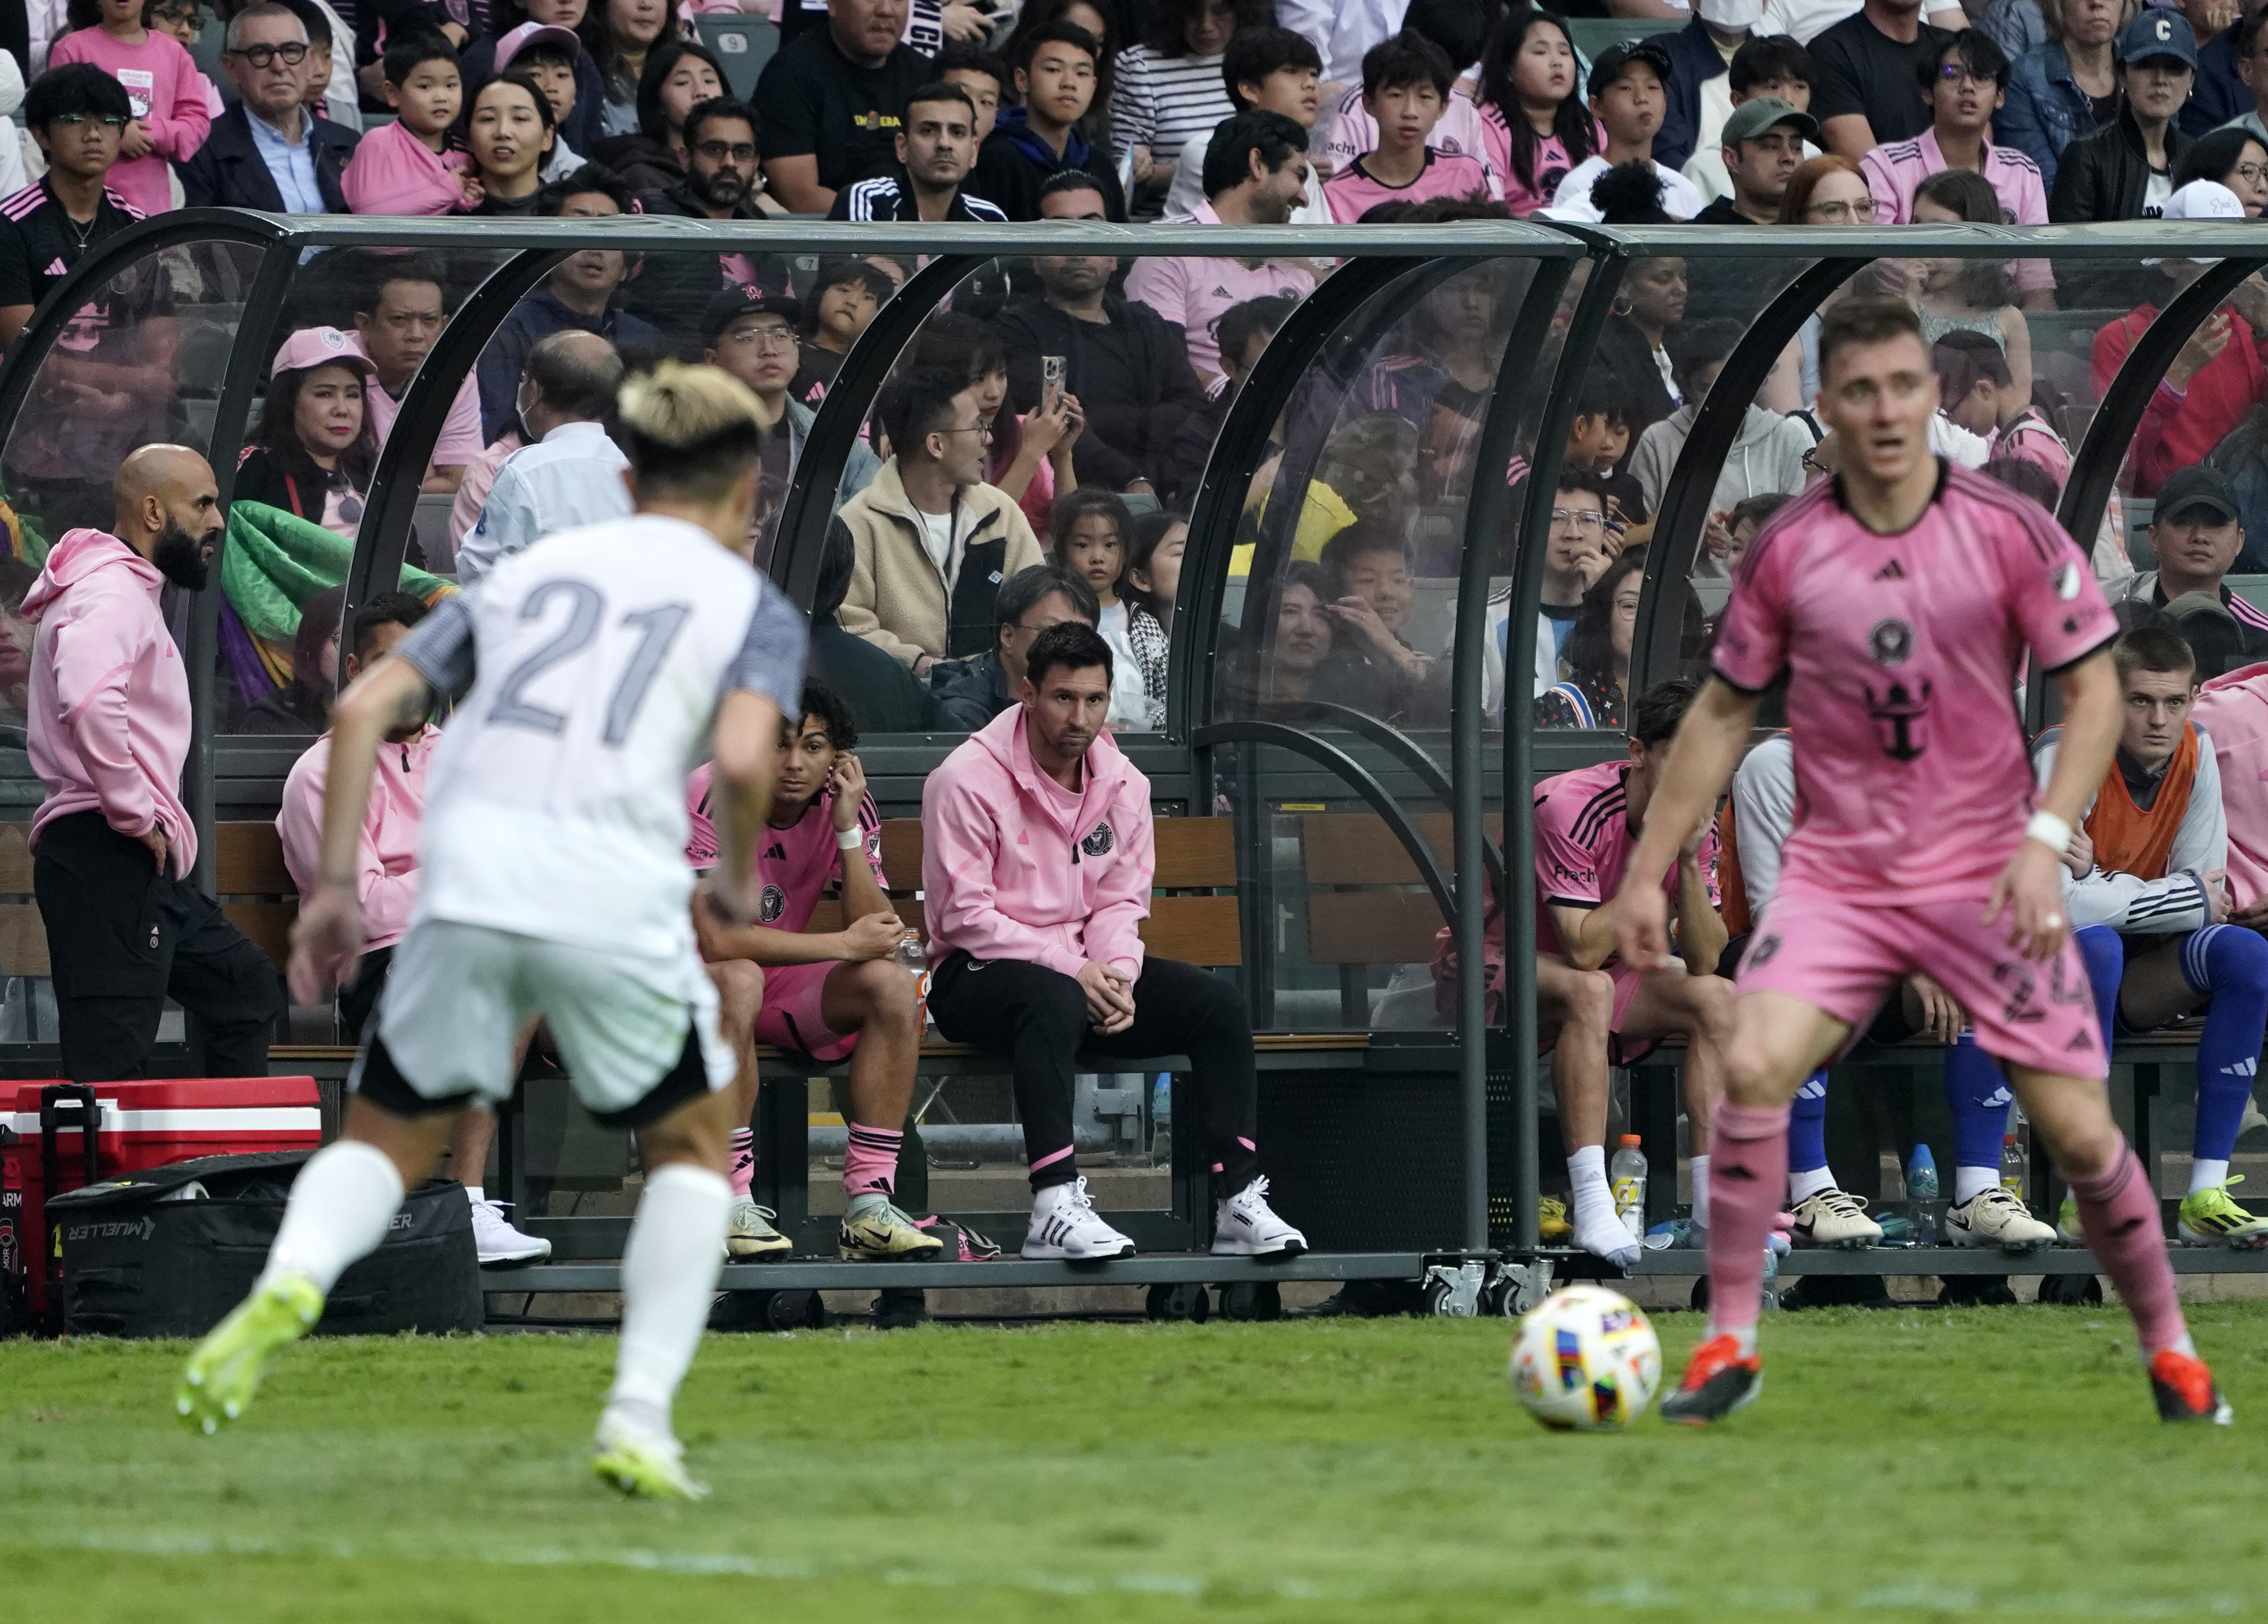 Lionel Messi remains on the bench during an Inter Miami friendly in Hong Kong. Fans were left angry and disappointed after the football star missed the match entirely. Photo: Getty Images